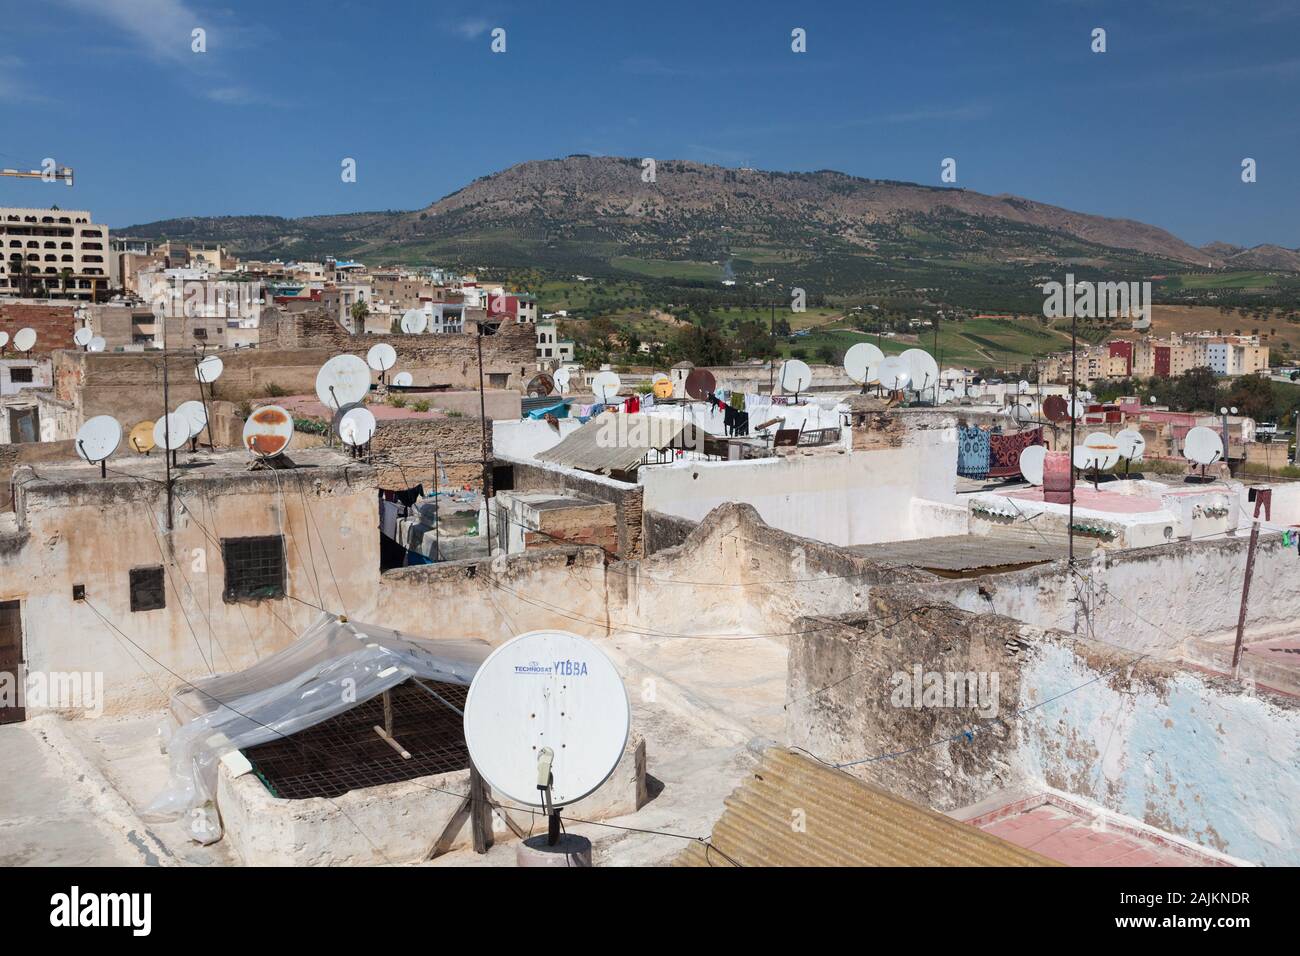 Lots of satellite dishes on the rooftops of buildings in Fes (also known as Fez), Morocco Stock Photo